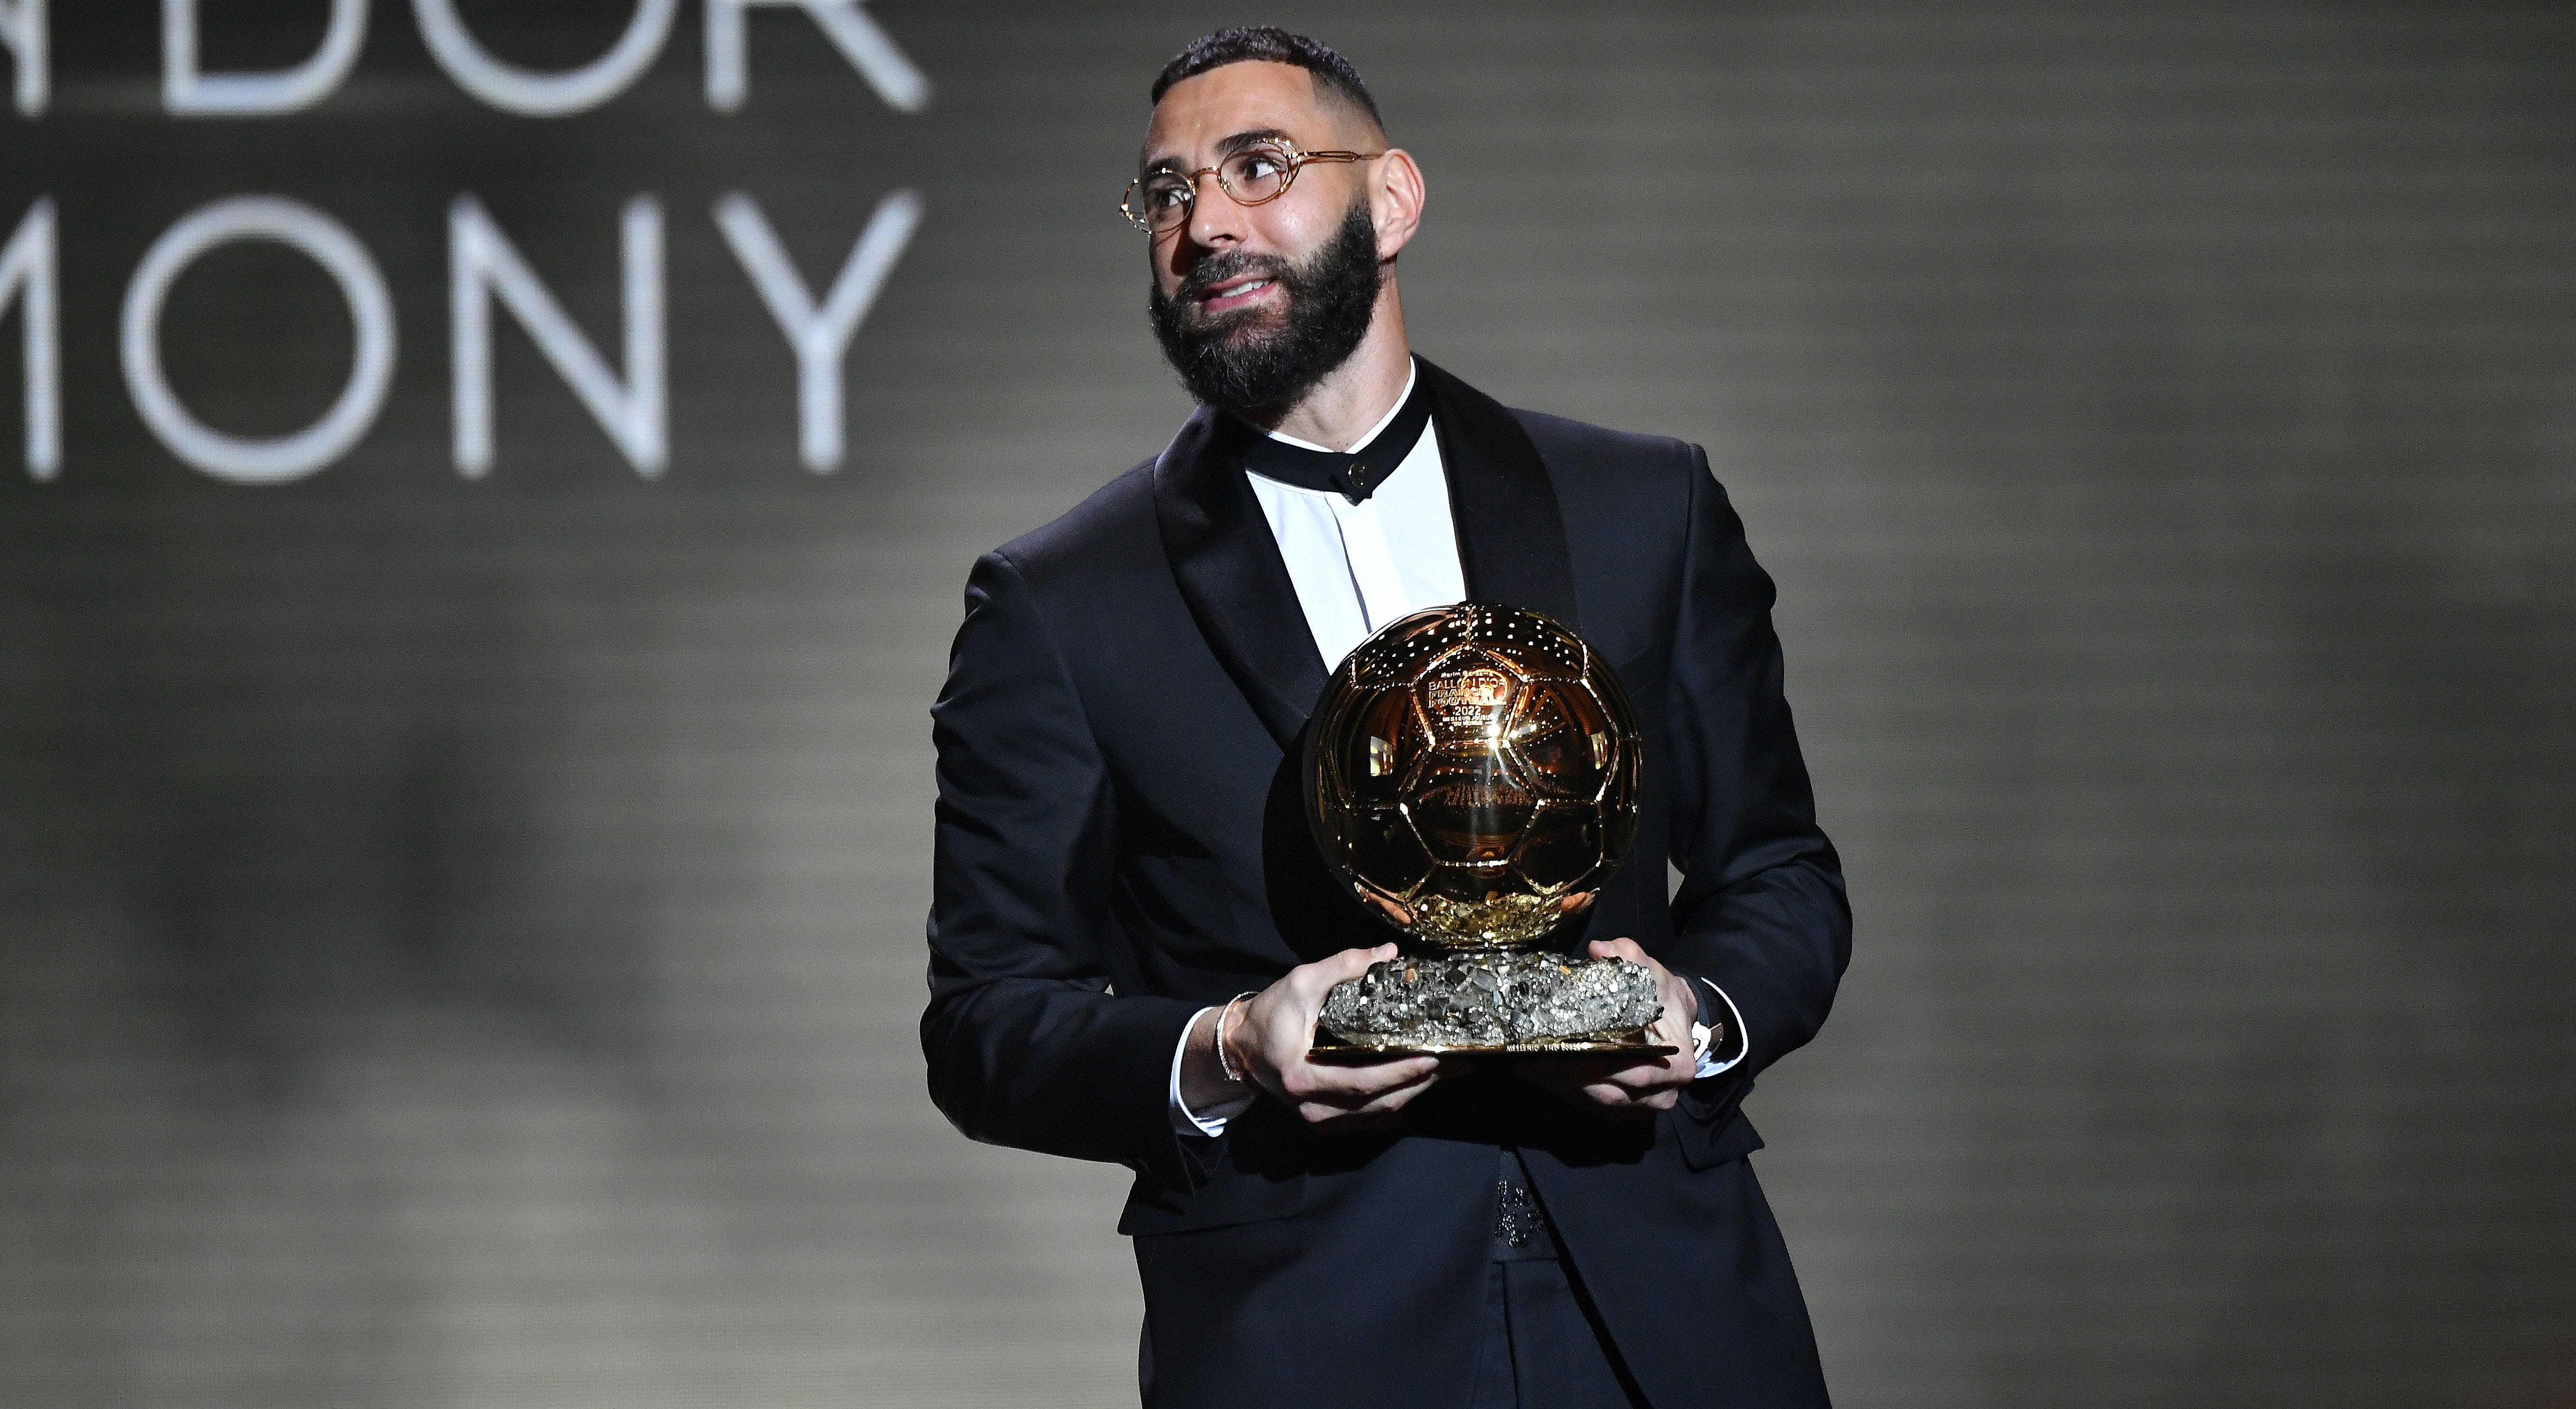 Real Madrid's Karim Benzema wins Ballon d'Or as best soccer player in